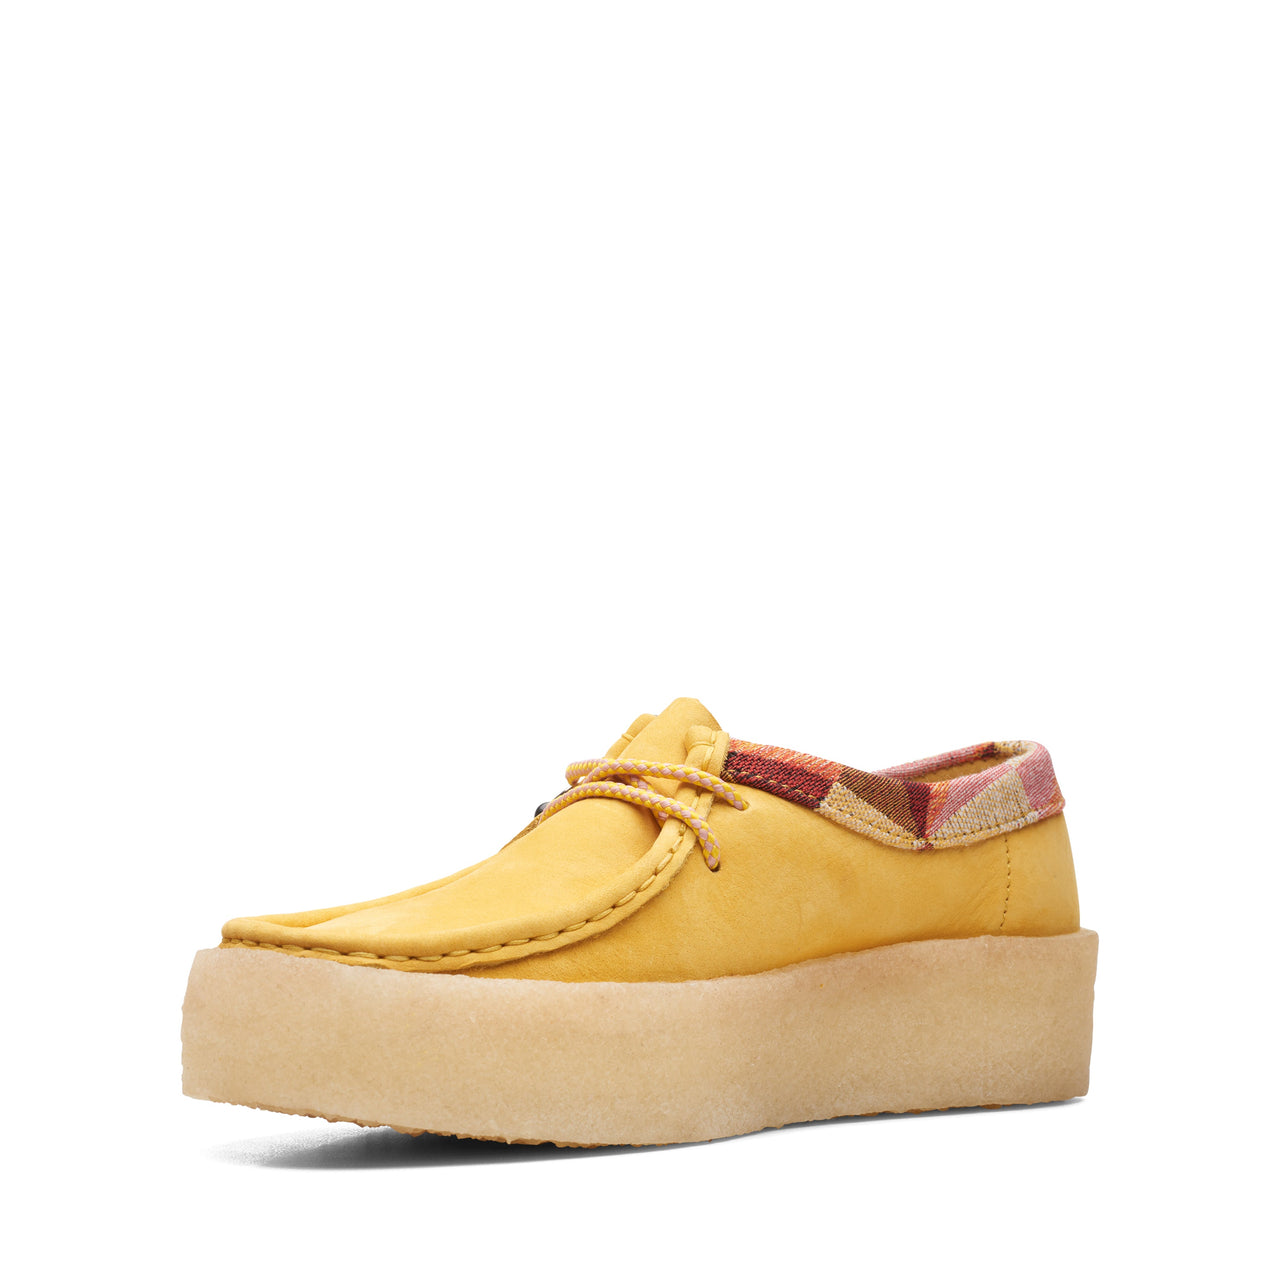  Fashionable and versatile yellow nubuck women's shoes by Clarks 